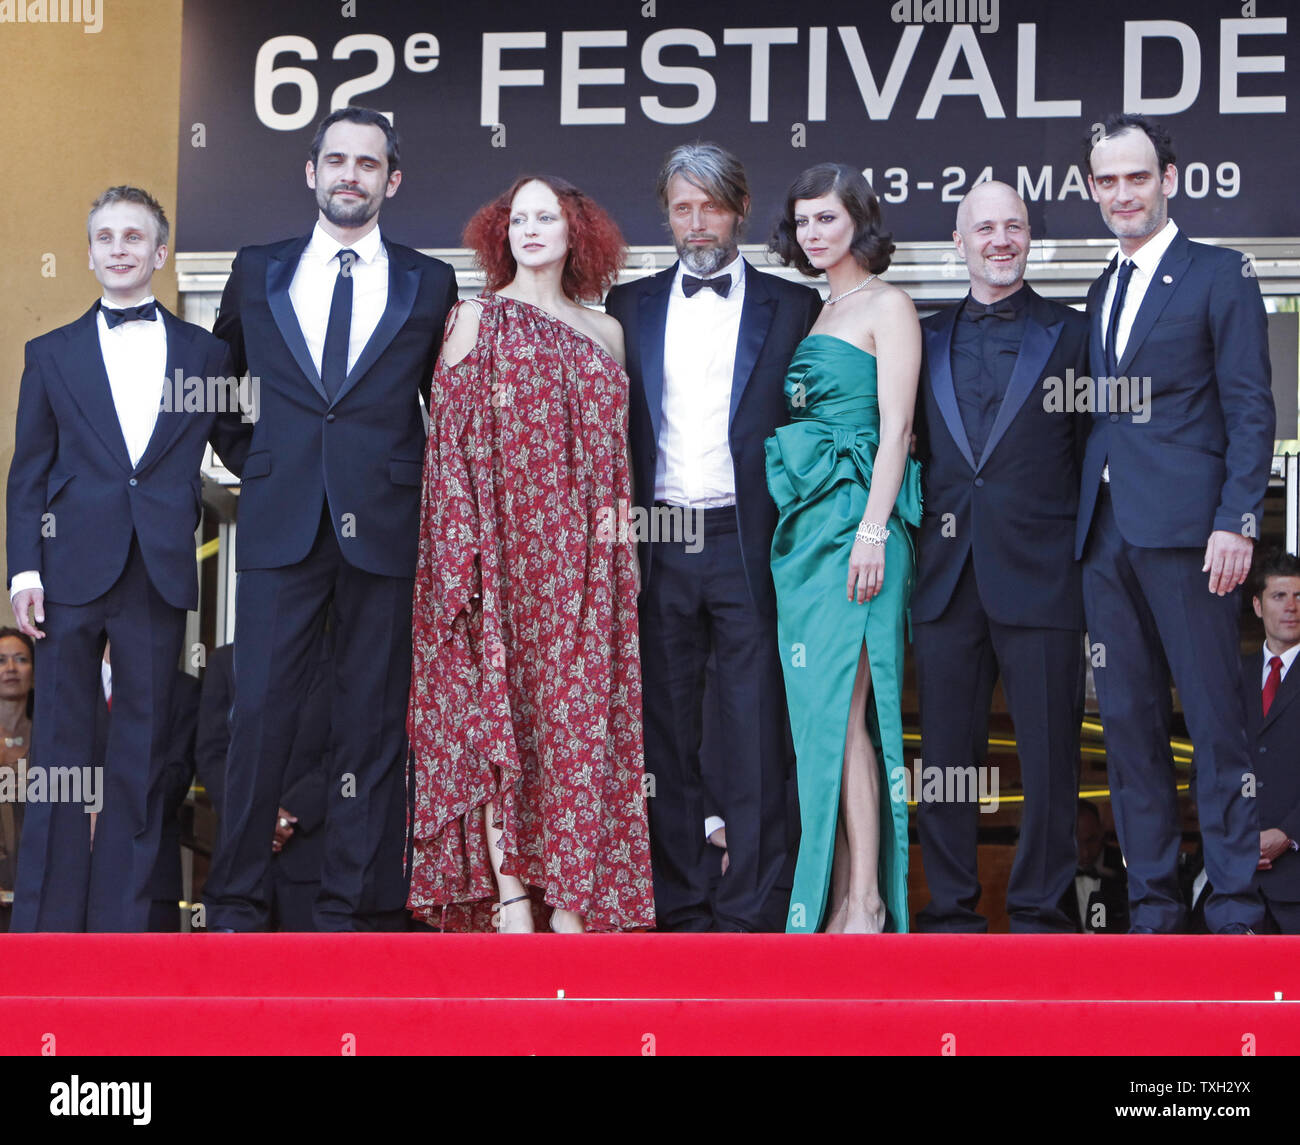 The cast and crew of the film 'Coco Chanel & Igor Stravinsky', including actress Elena Morozova, actor Mads Mikkelsen, actress Anna Mouglalis and director Jan Kounen, arrive at the top of the red steps of the Palais des Festivals before the premiere of their film during the closing ceremony of the 62nd annual Cannes Film Festival in Cannes, France on May 24, 2009.   (UPI Photo/David Silpa) Stock Photo